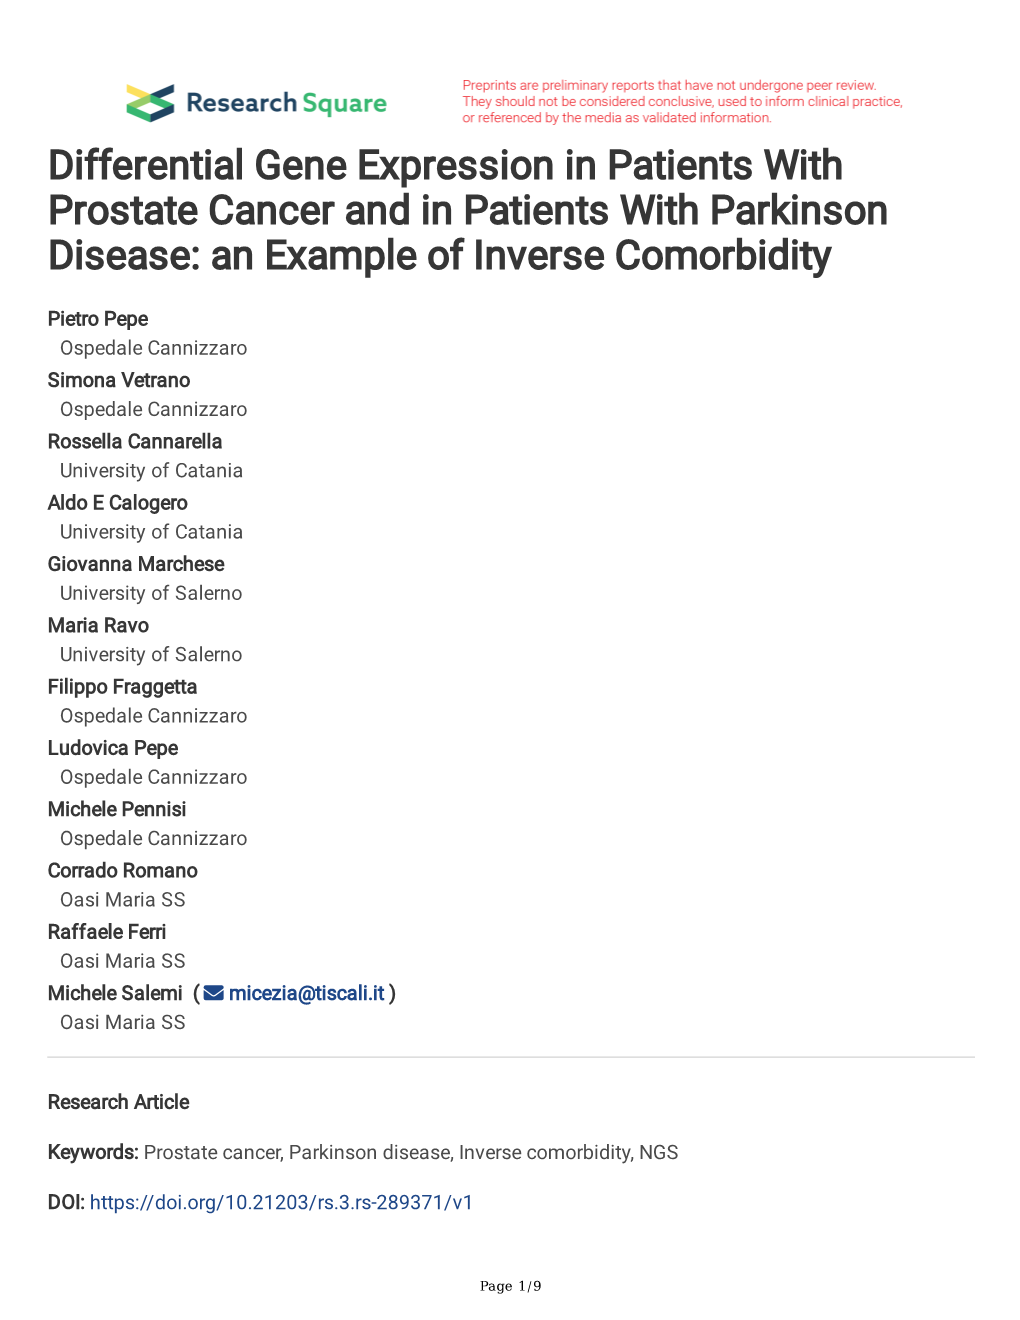 Differential Gene Expression in Patients with Prostate Cancer and in Patients with Parkinson Disease: an Example of Inverse Comorbidity